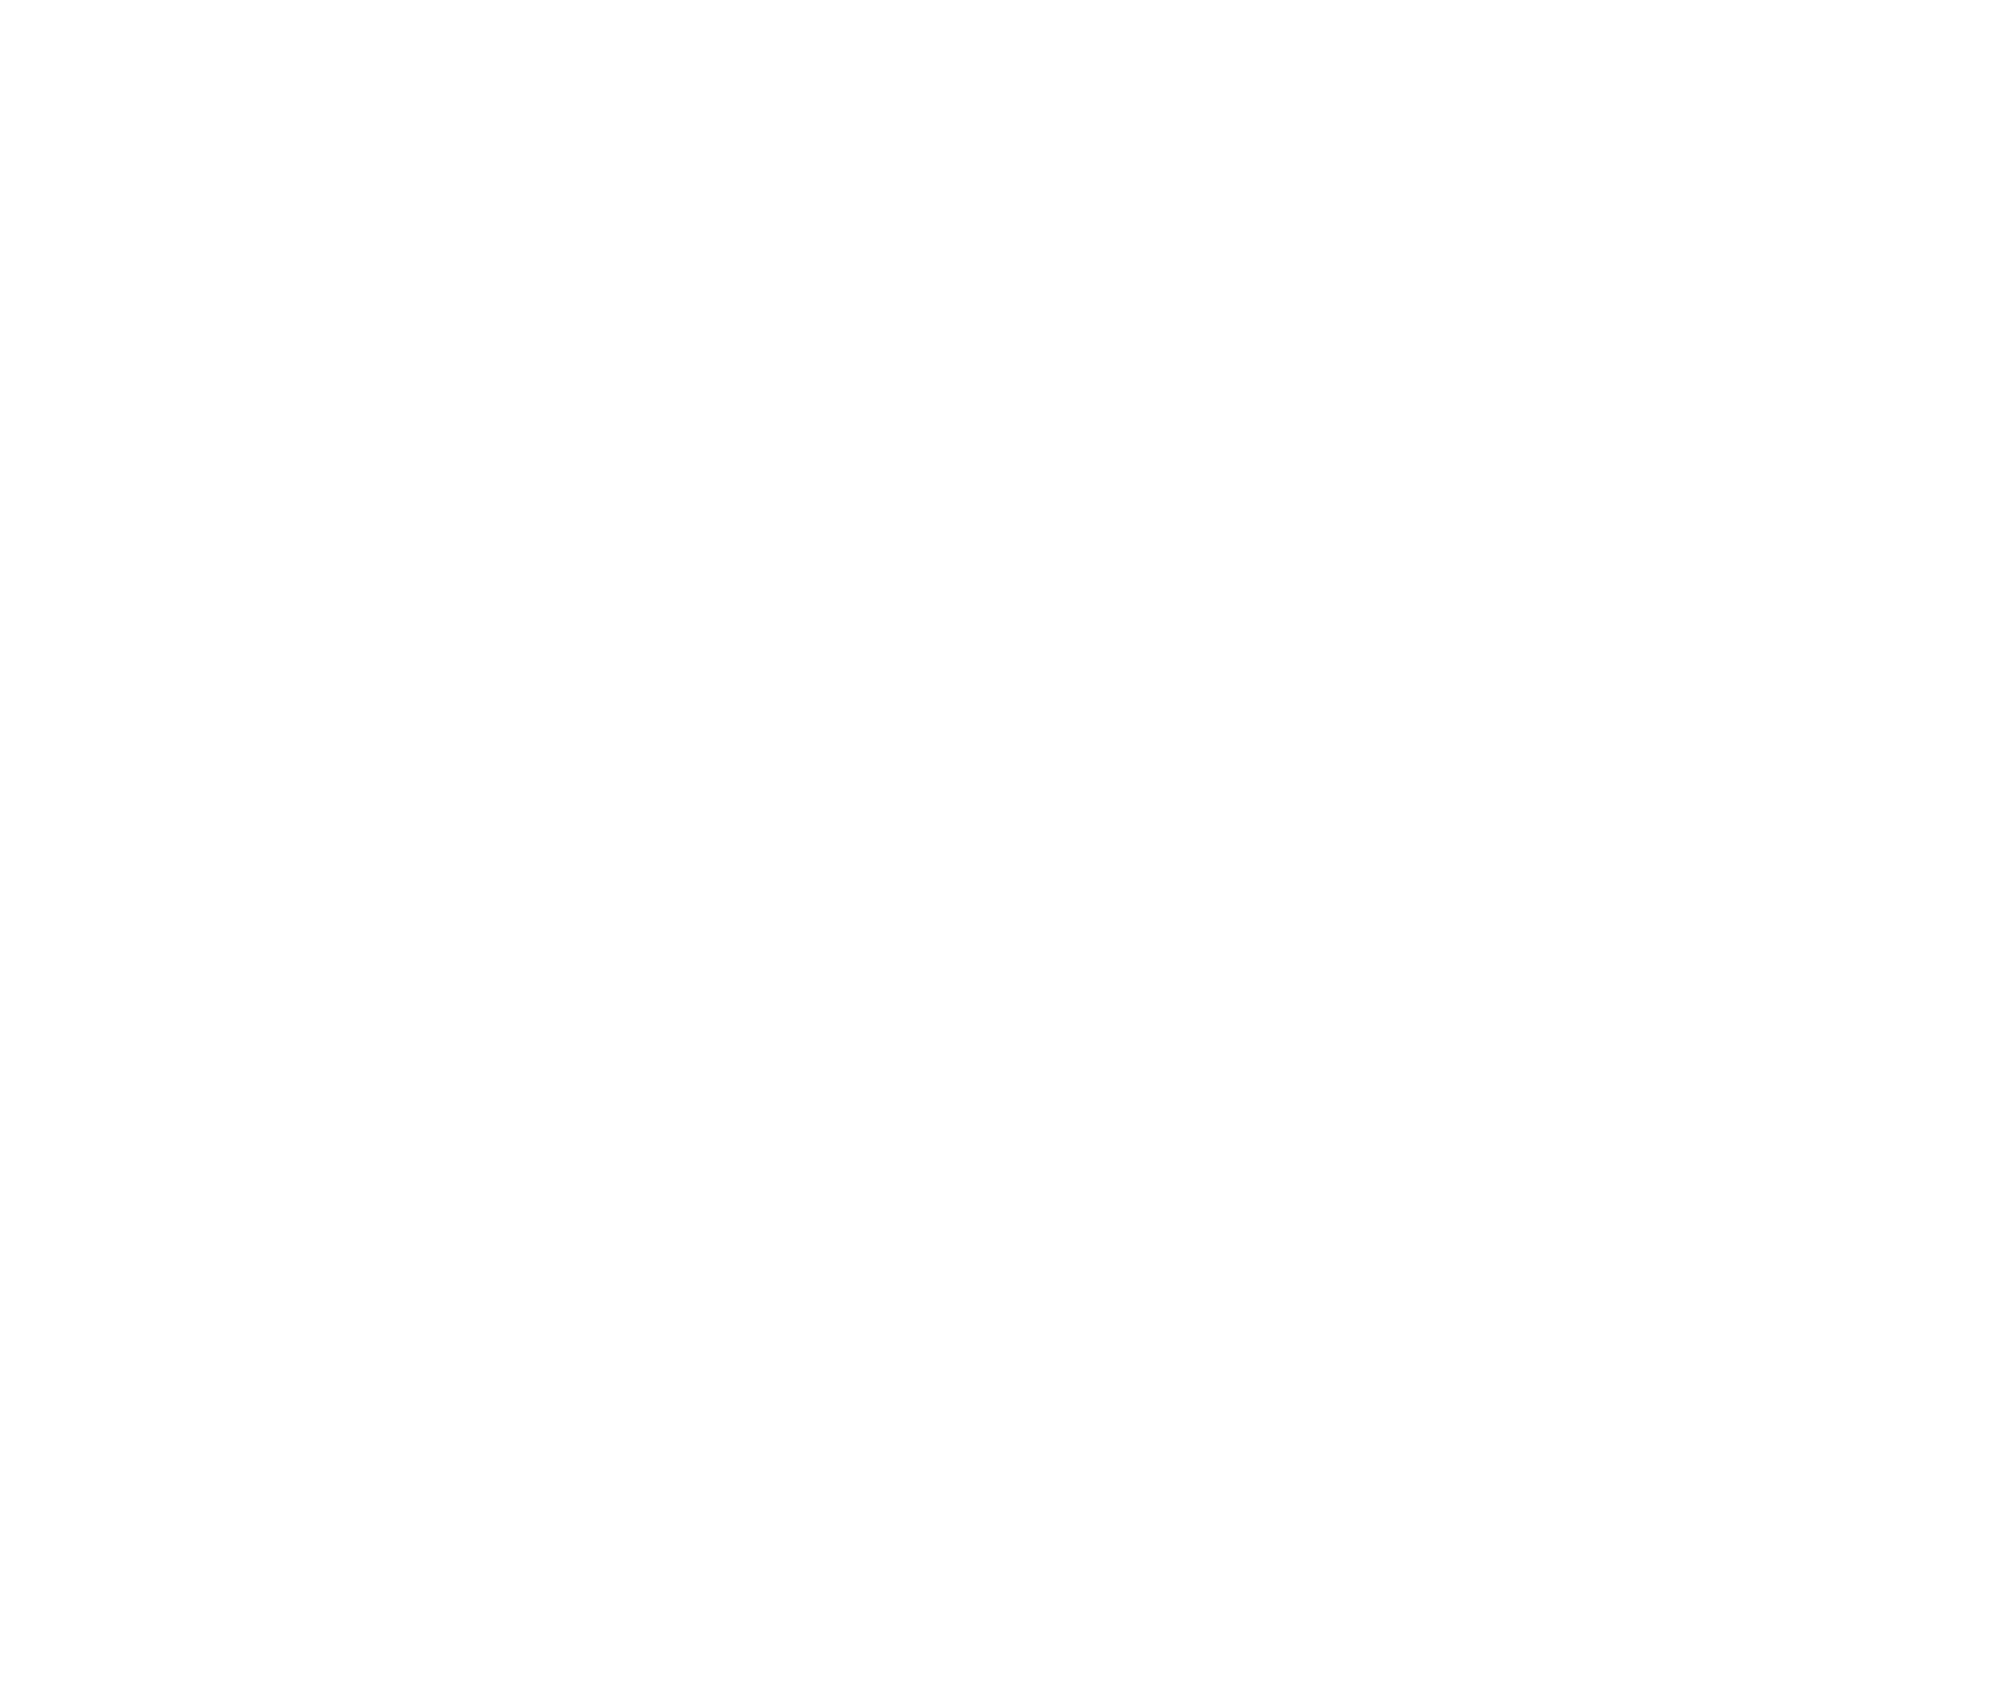 Solers legal s.r.o. law firm